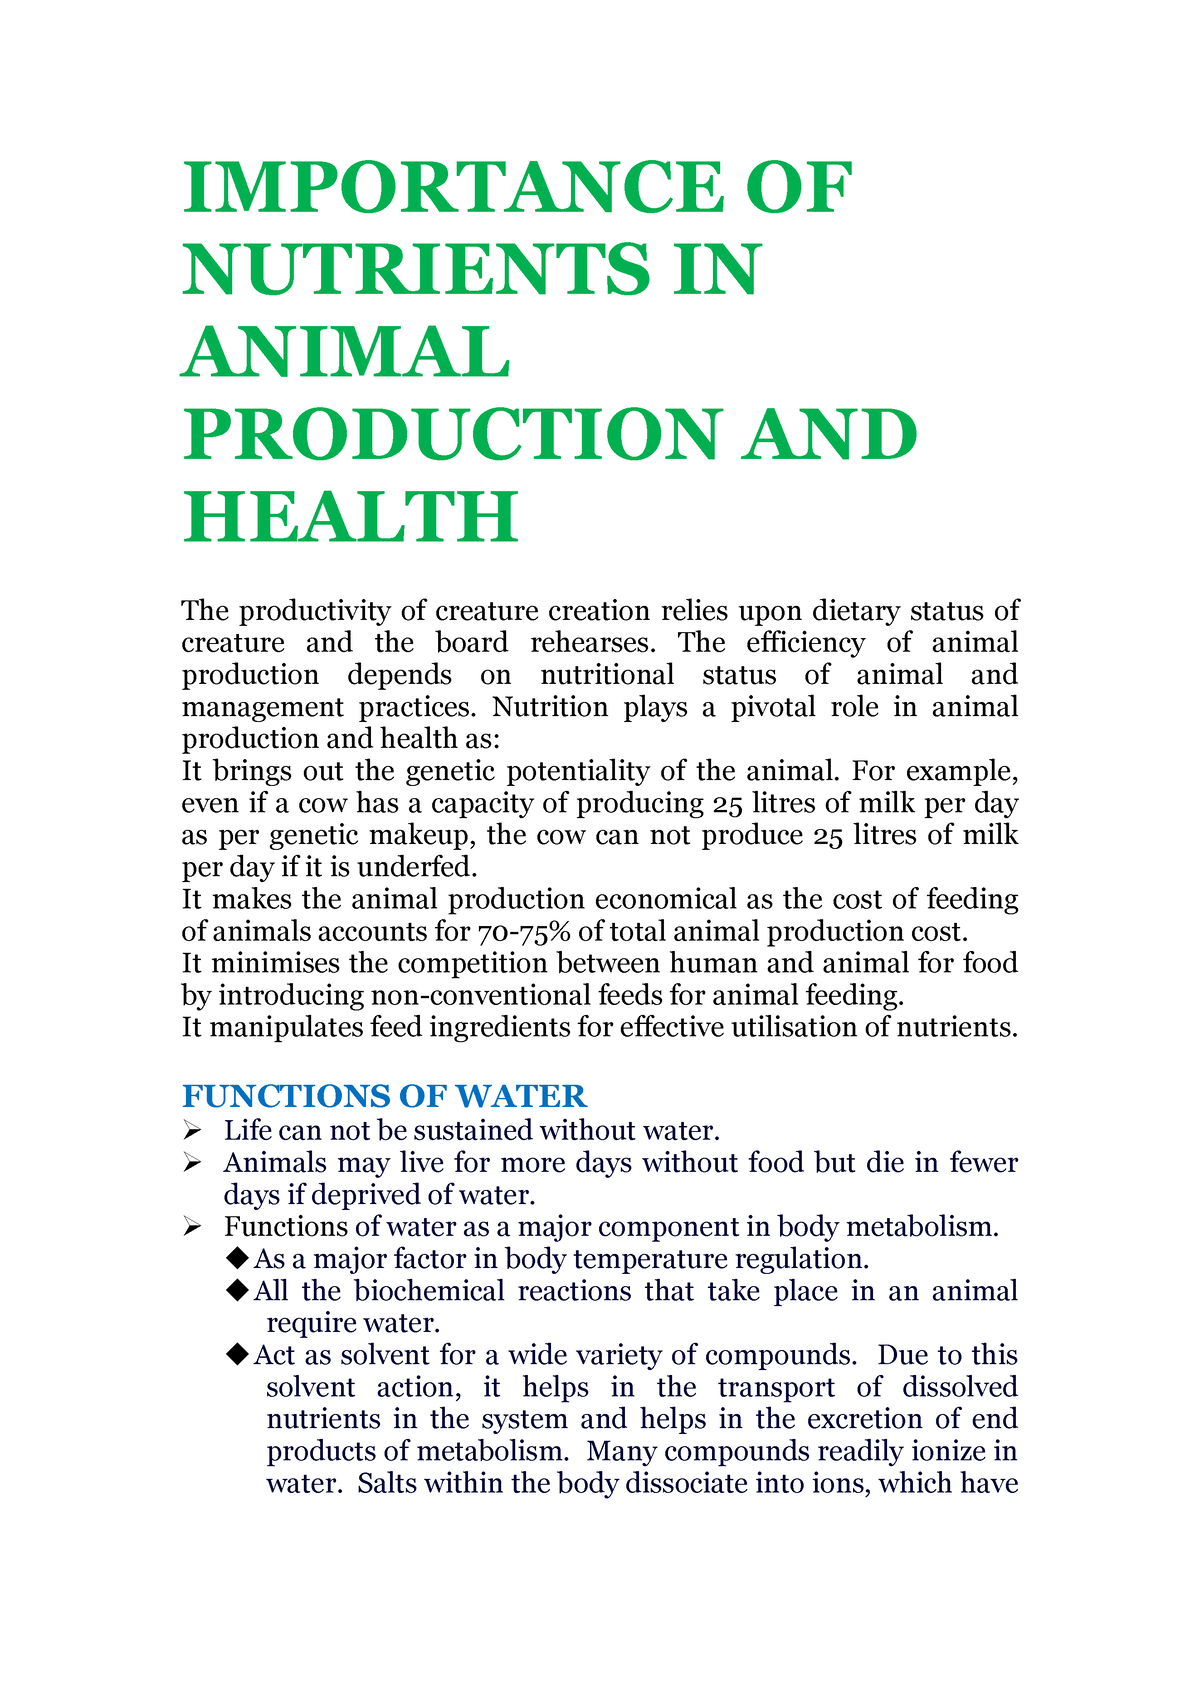 Importance OF Nutrients IN Animal Production AND Health - IMPORTANCE OF  NUTRIENTS IN ANIMAL - Studocu